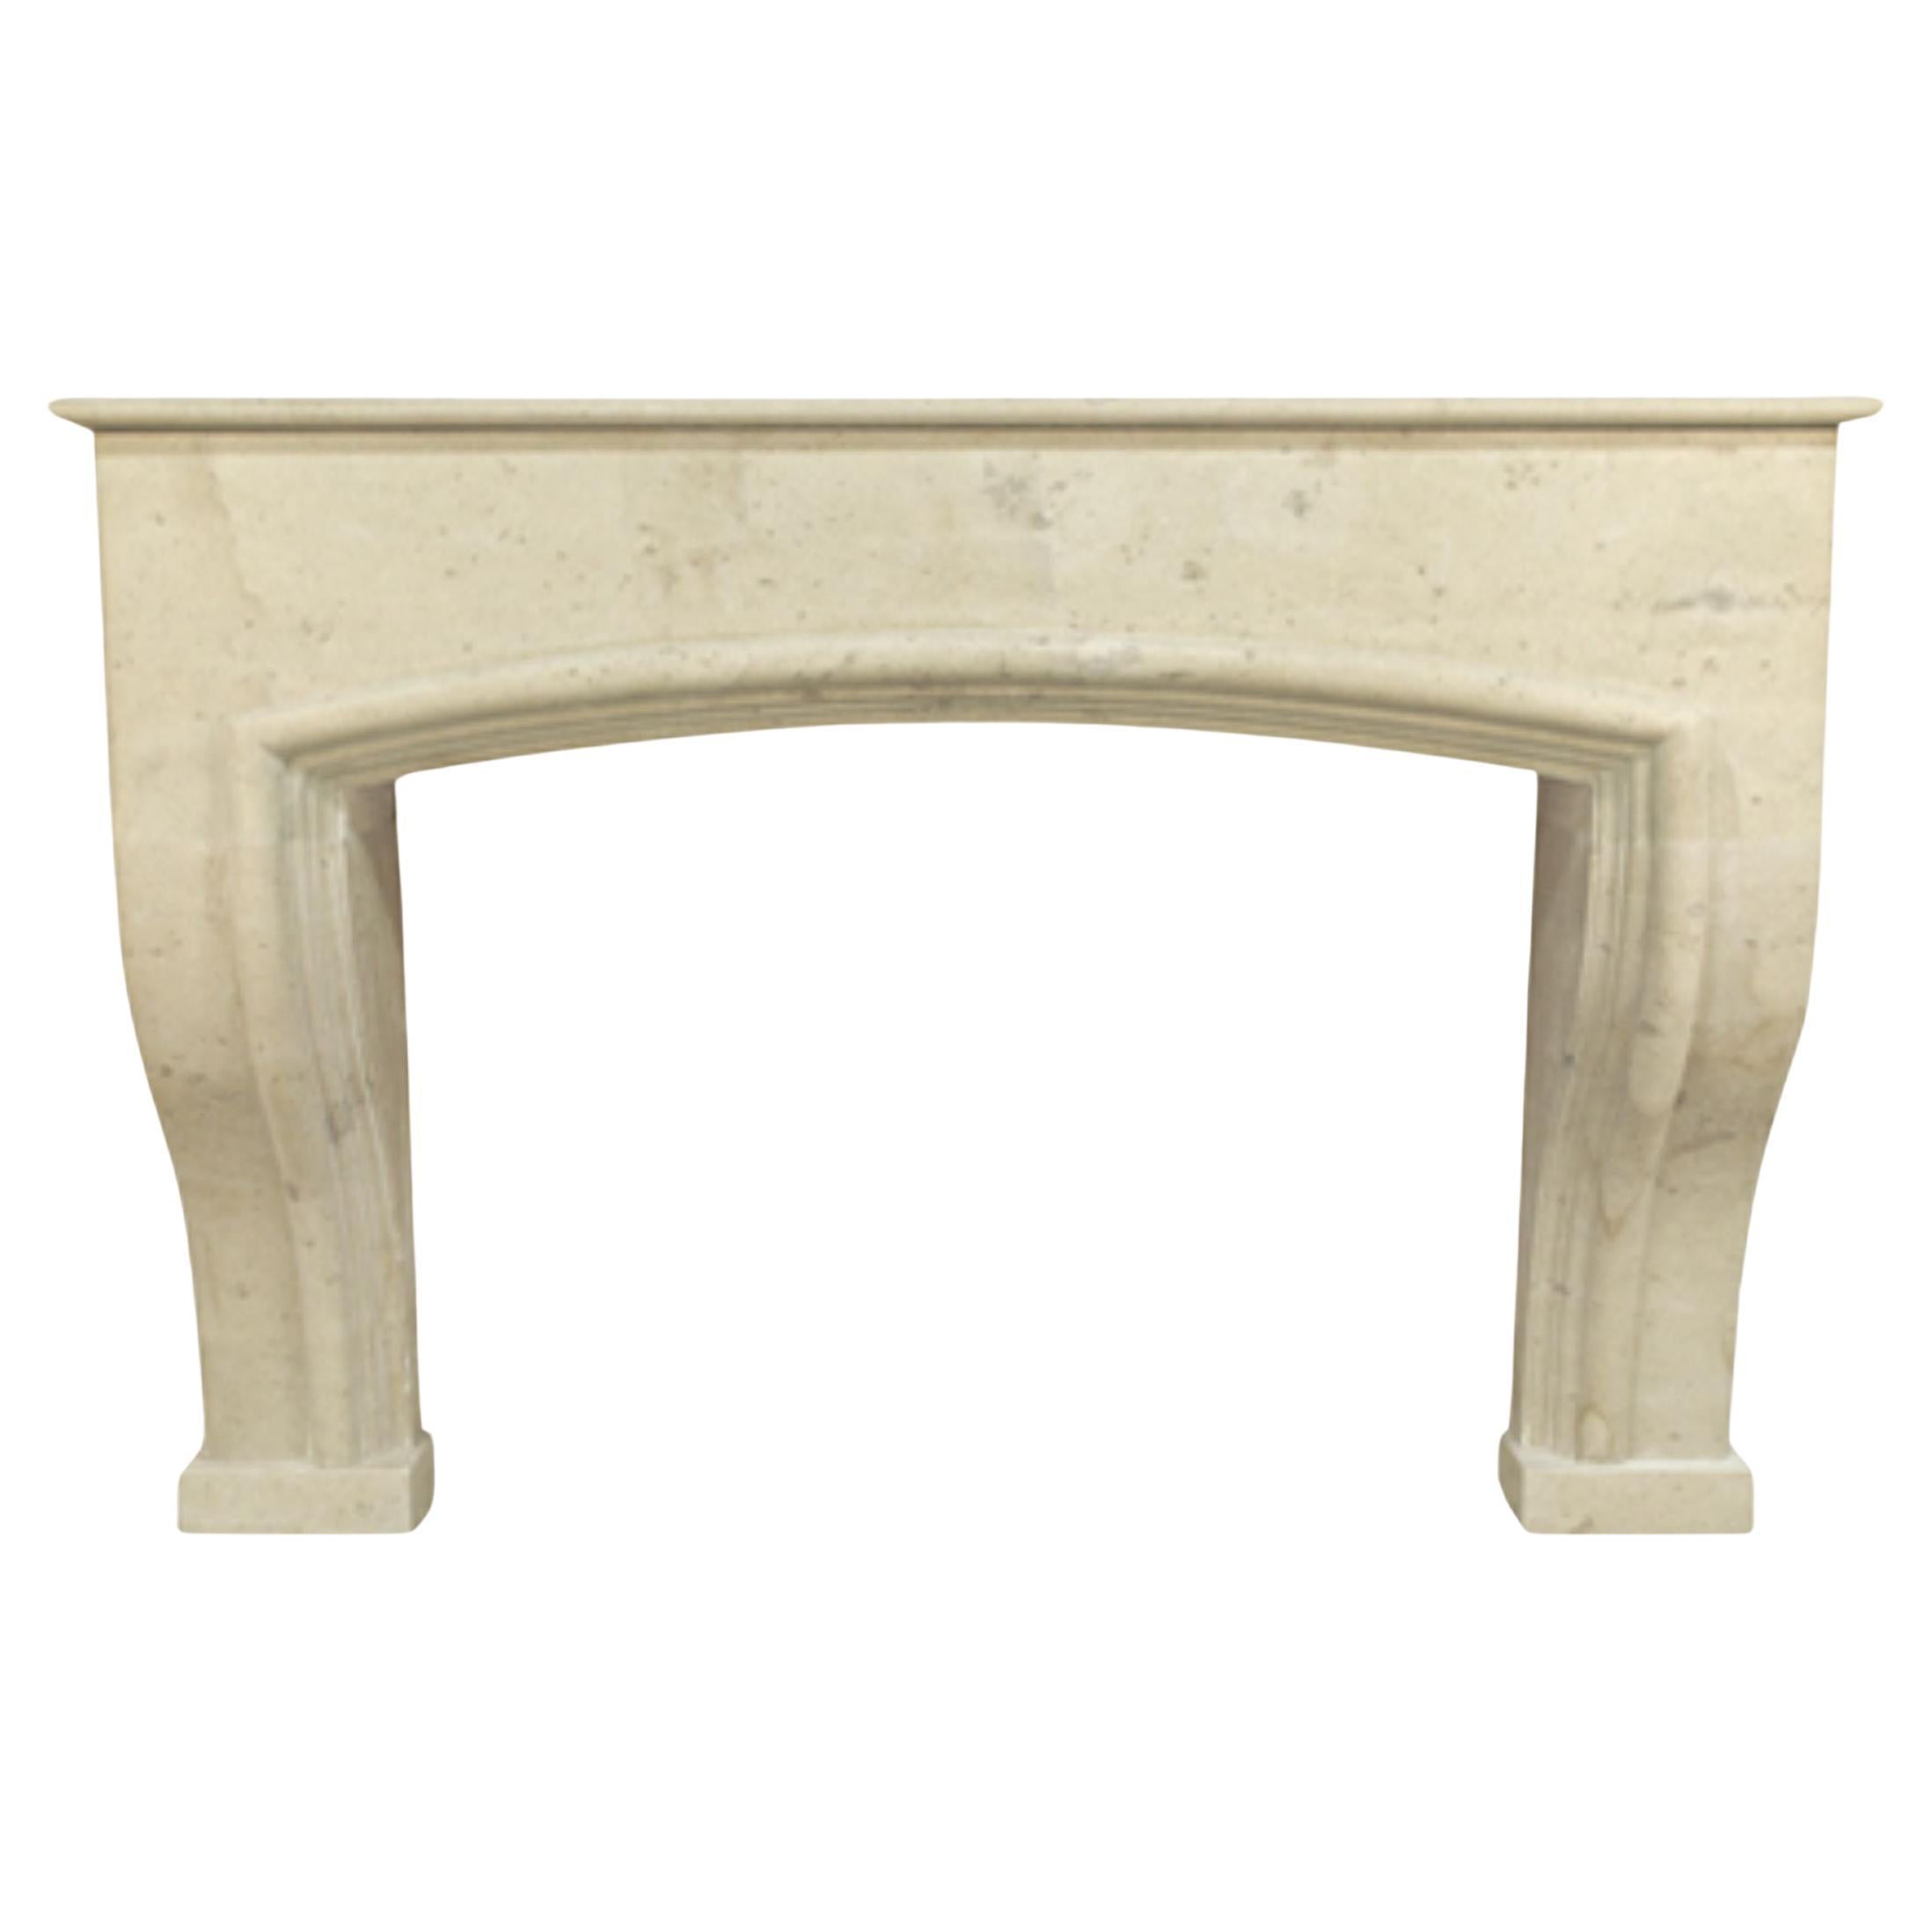 The Bourgogne: A Classic French Stone Fireplace For Sale